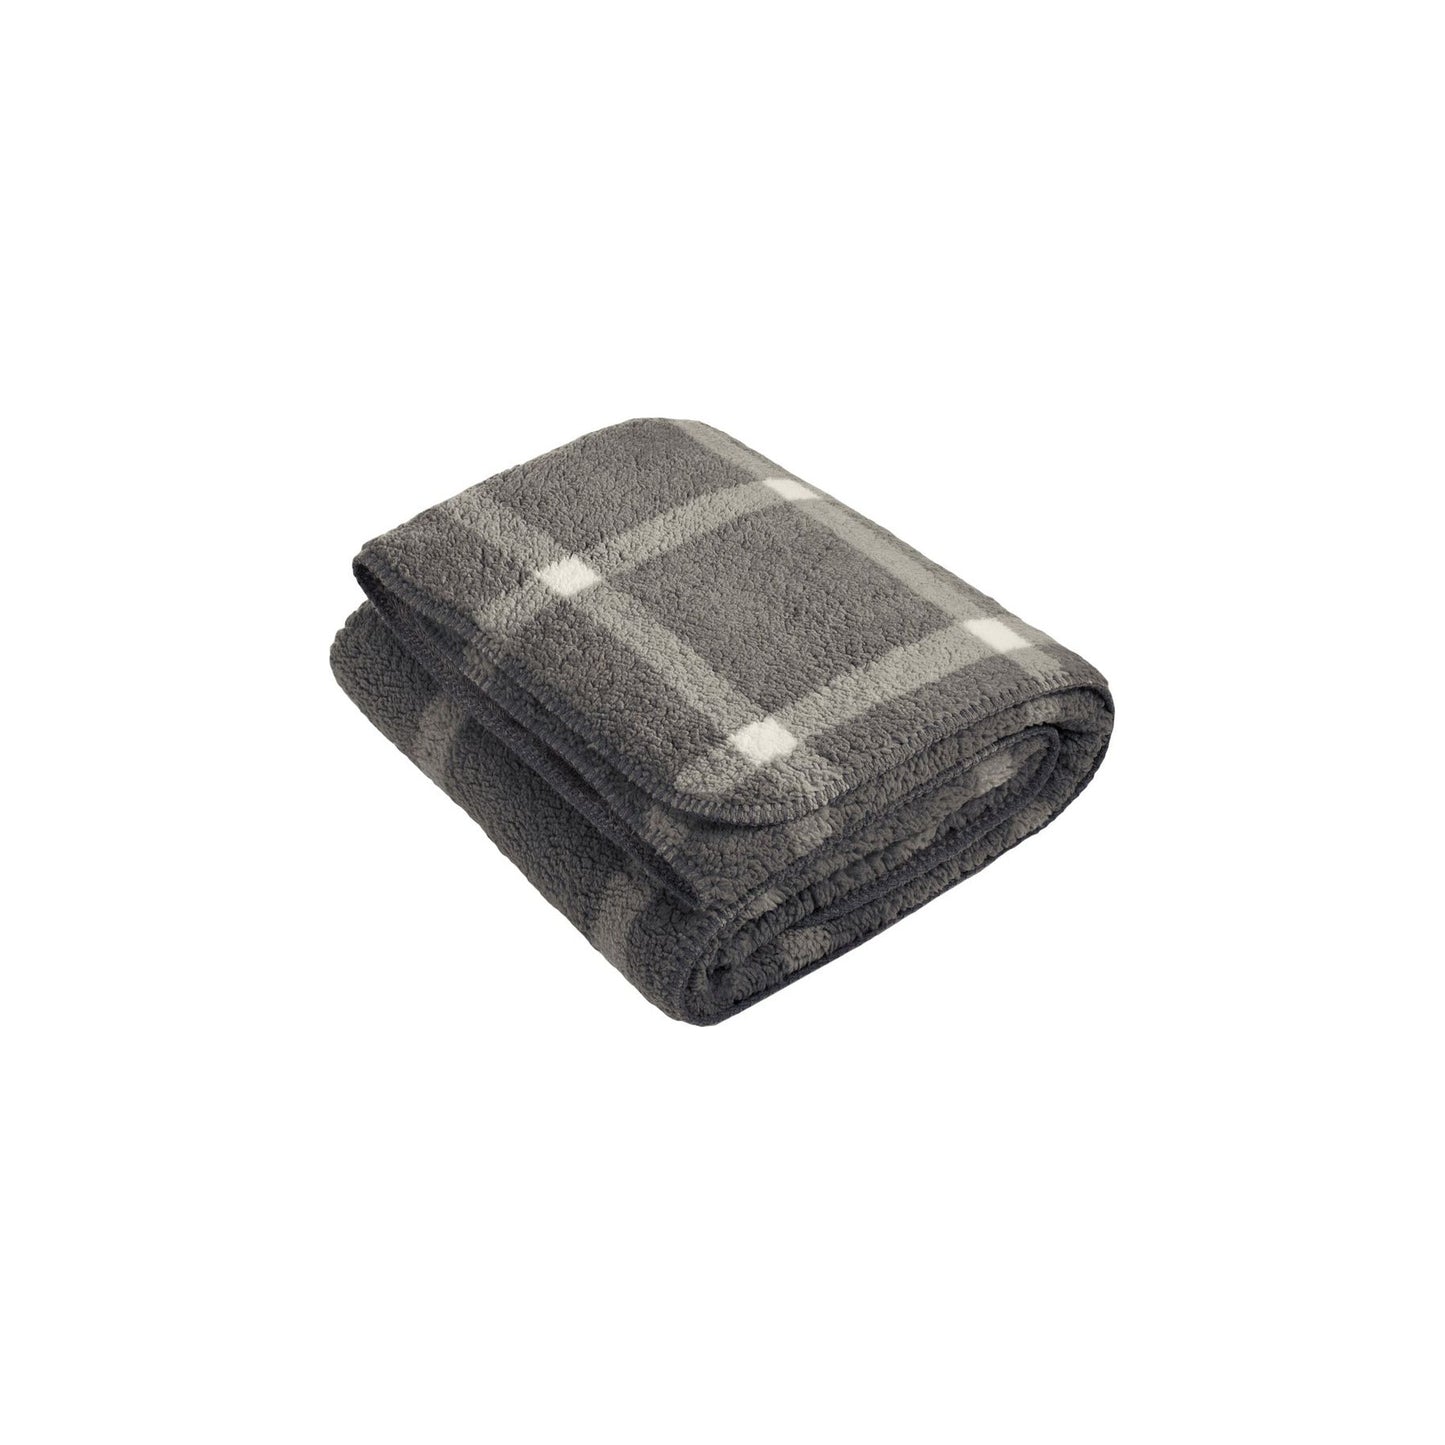 Port Authority Double-Sided Sherpa/Plush Blanket